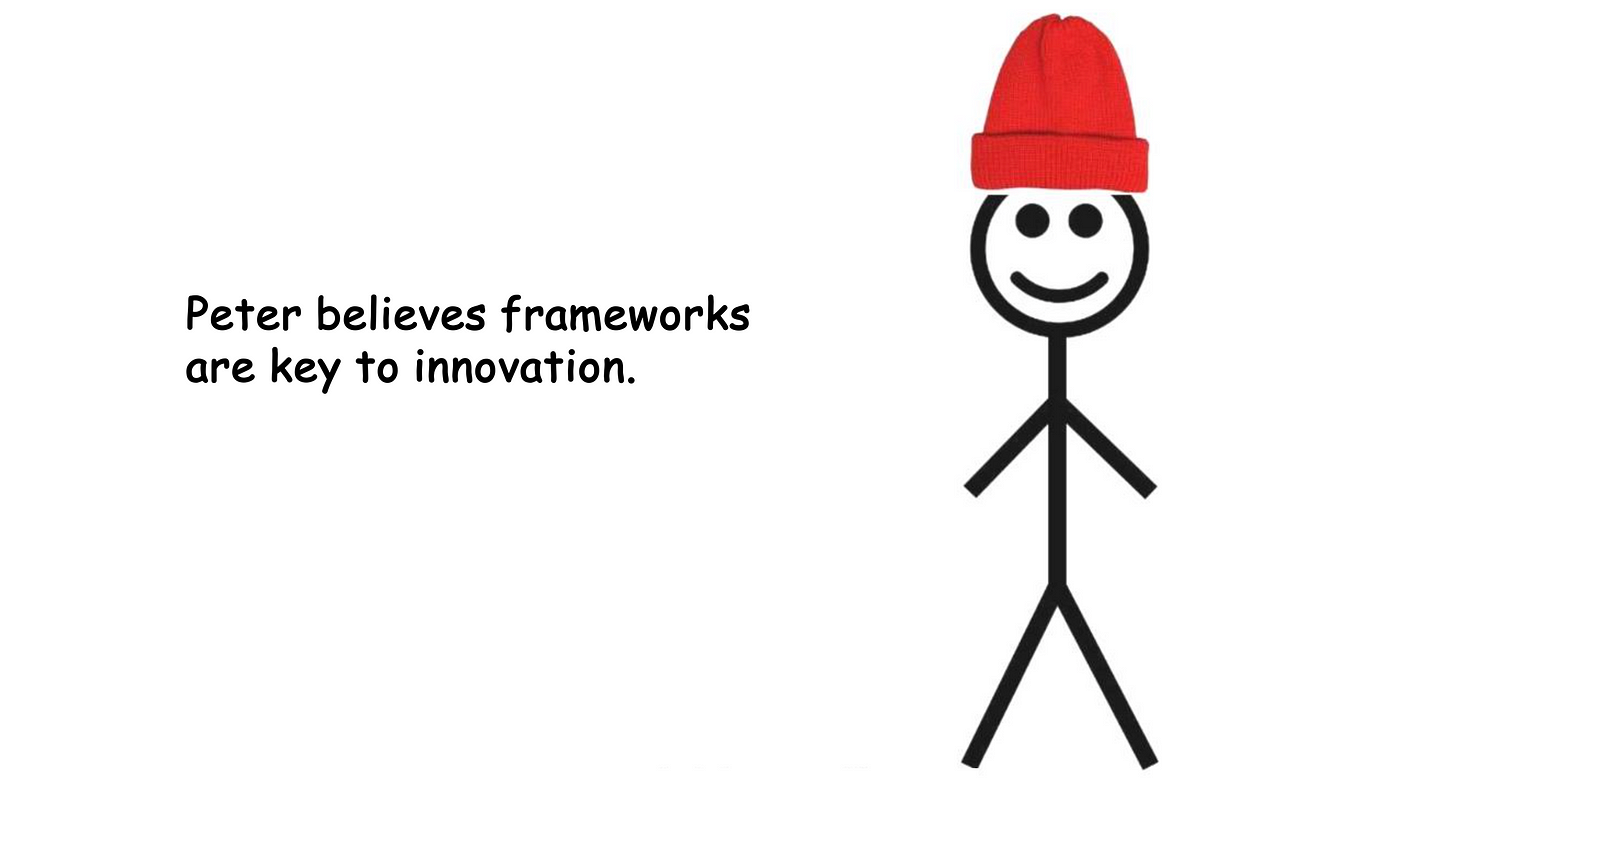 Peter believes frameworks are key to innovation.